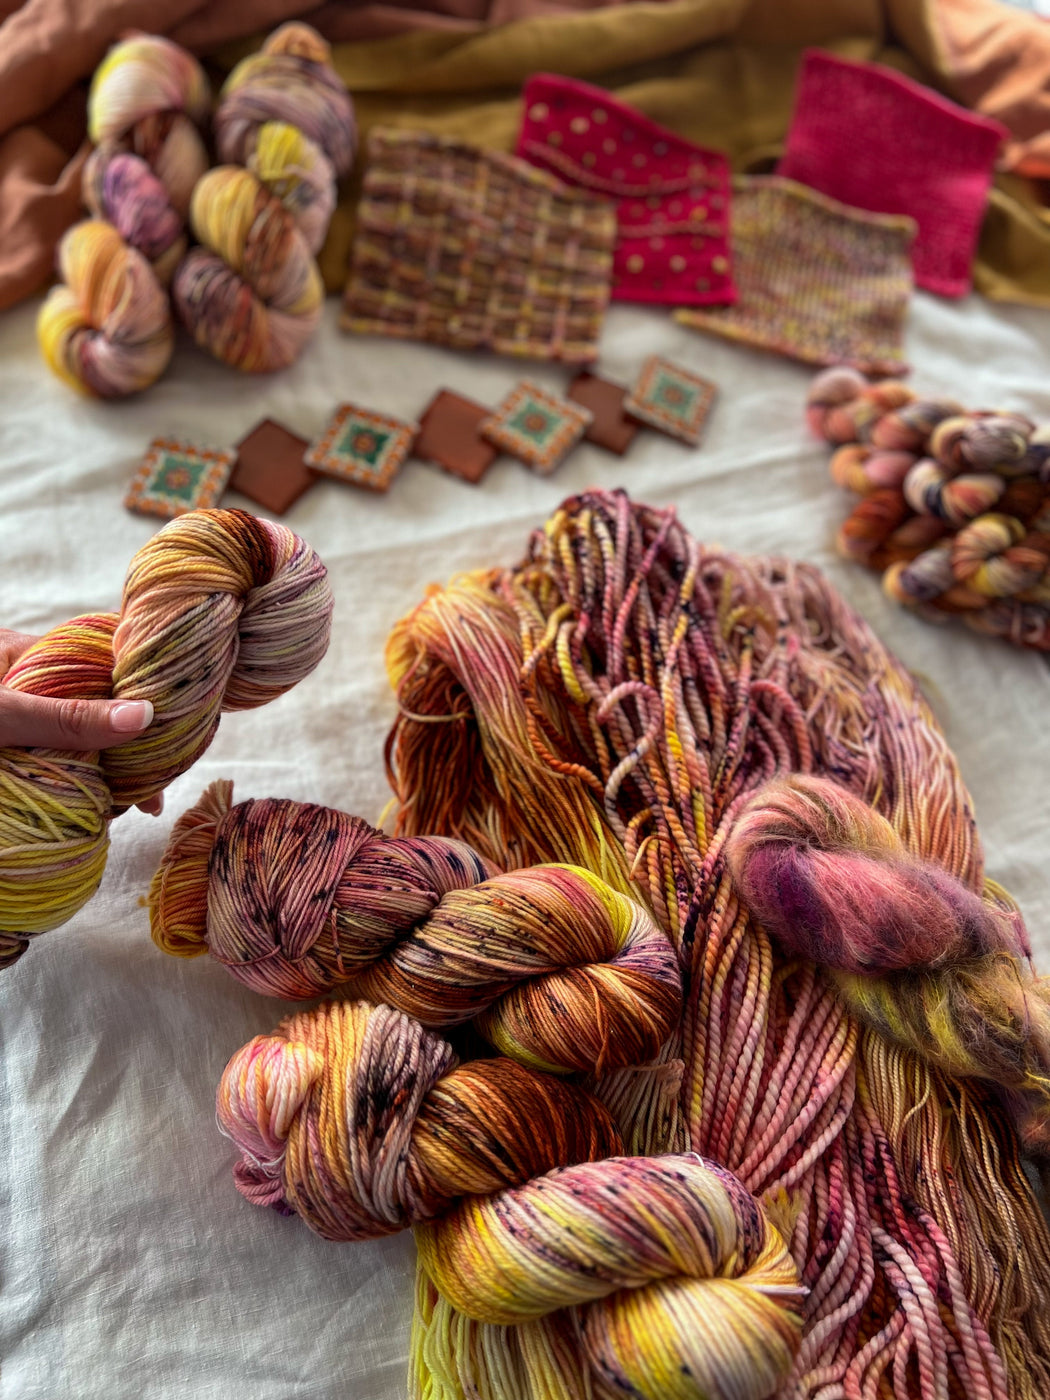 Golden Alley - Ruby and Roses Yarn - Hand Dyed Yarn